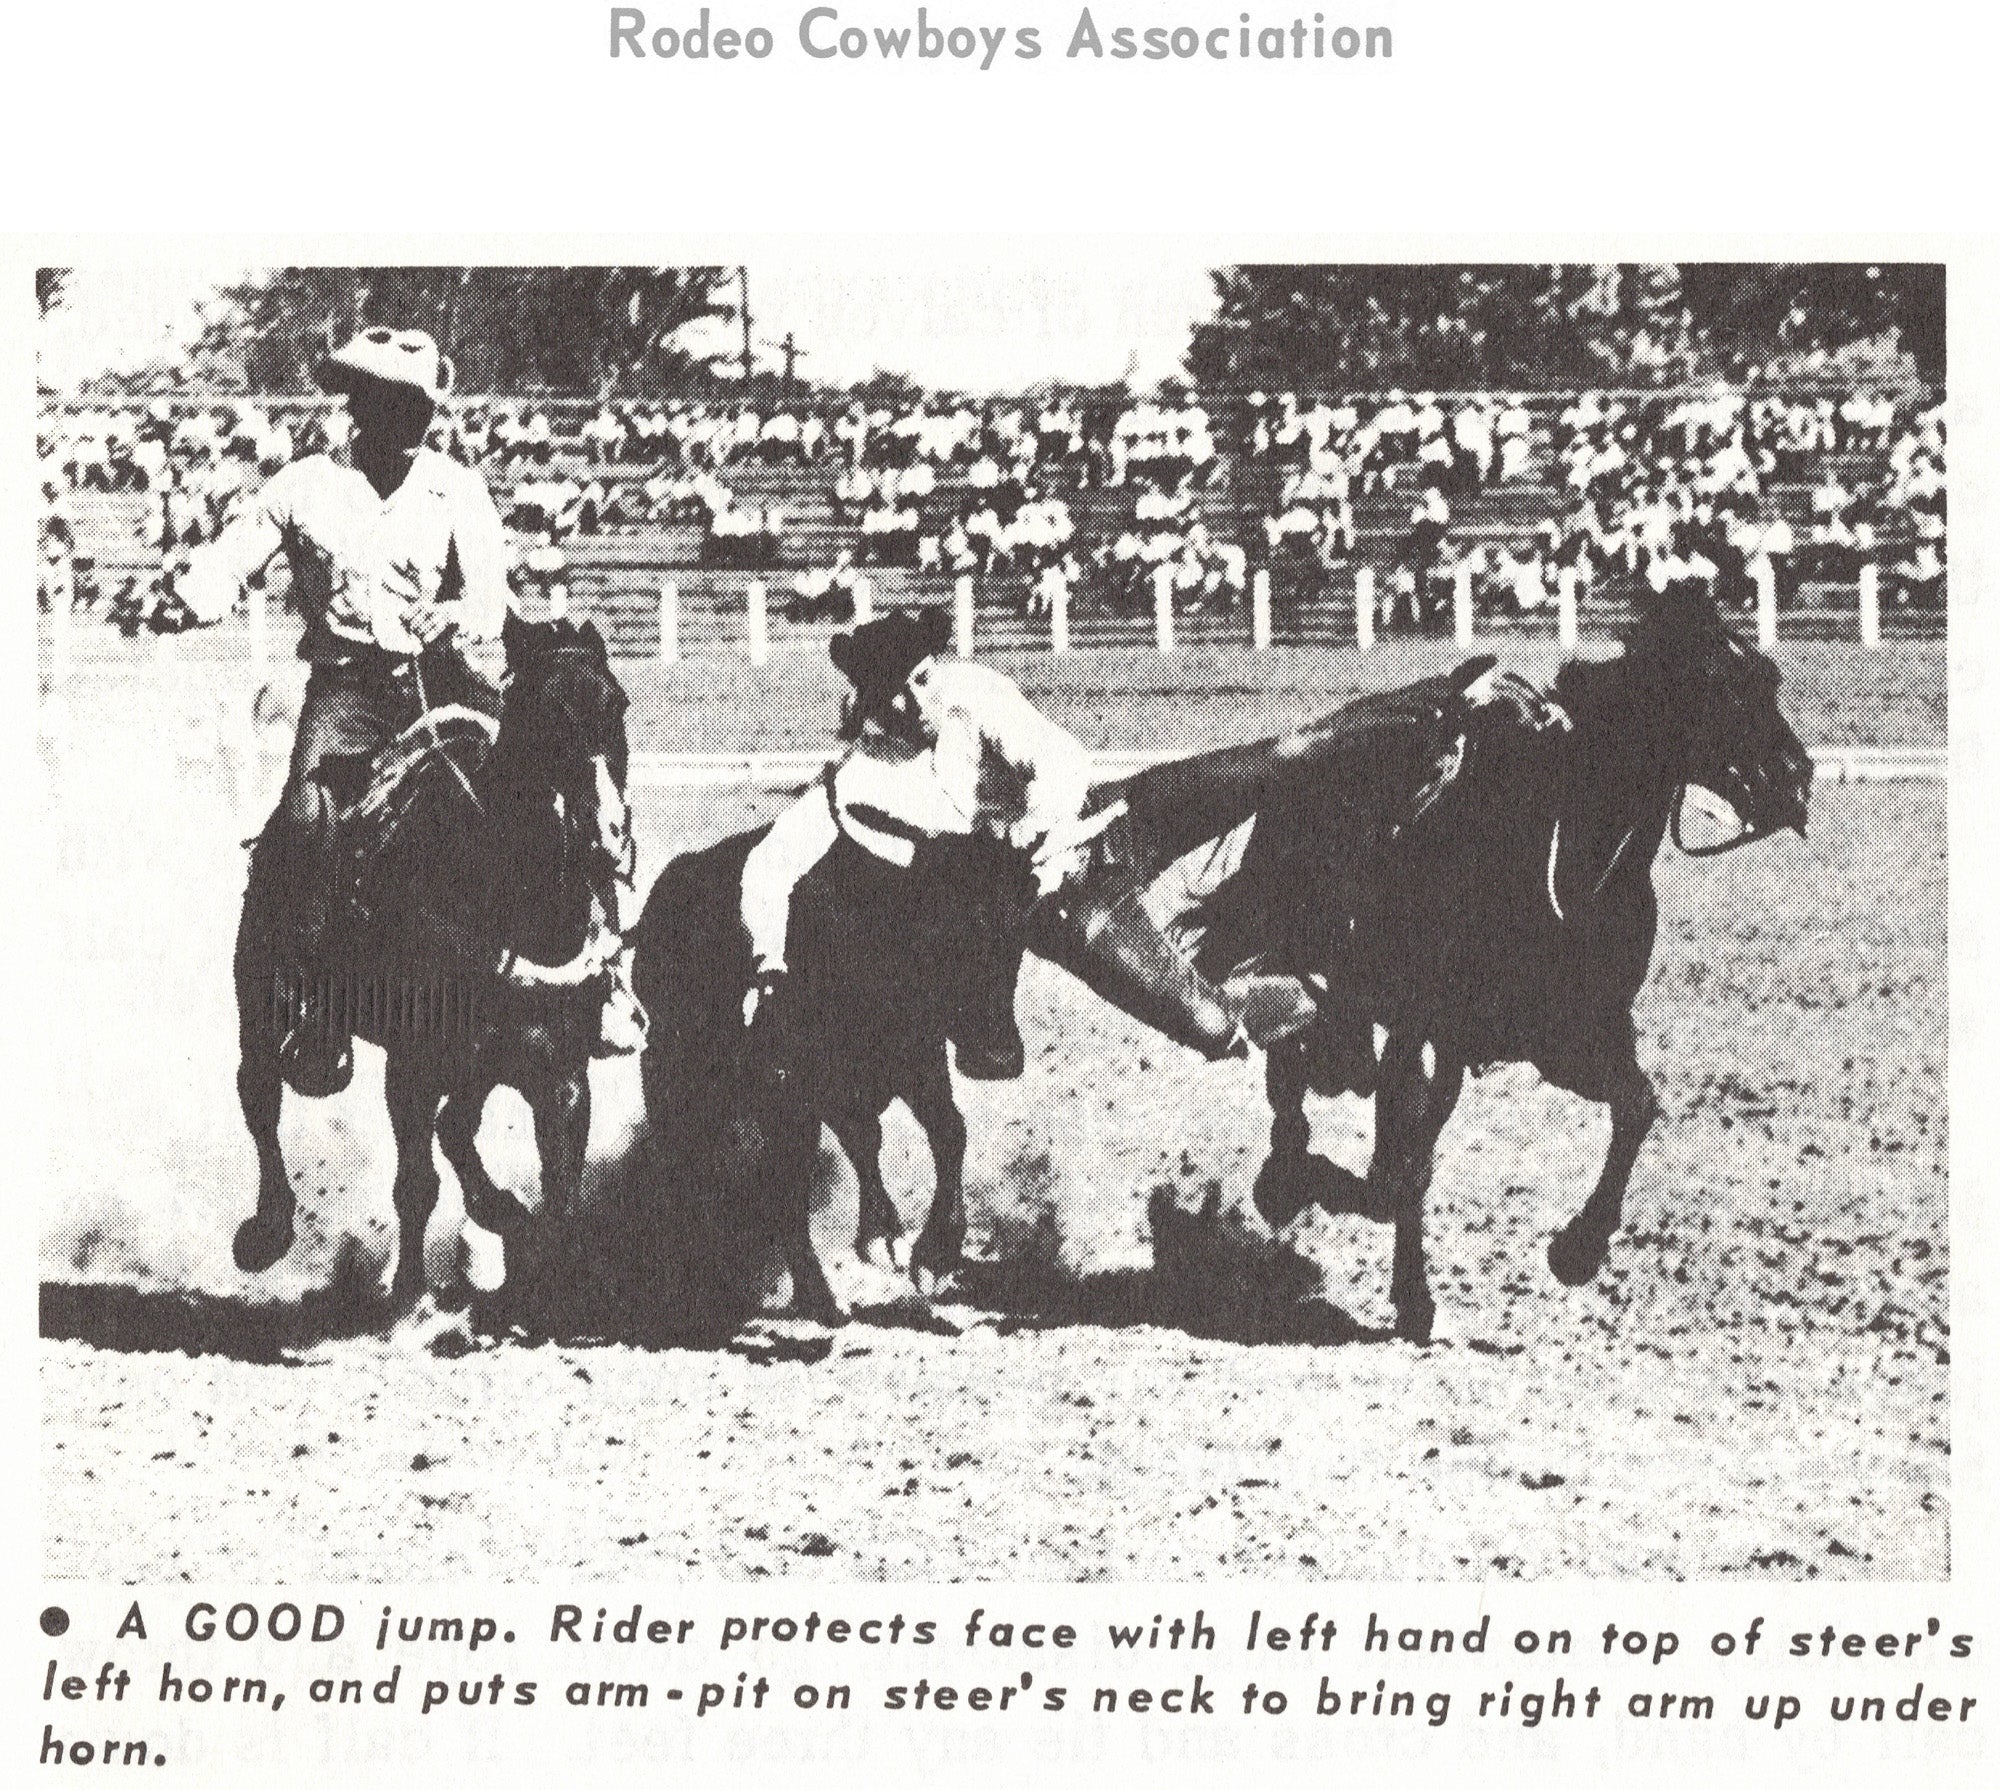 Rodeo Cowboys Association - How To Ride And Train The Western Horse